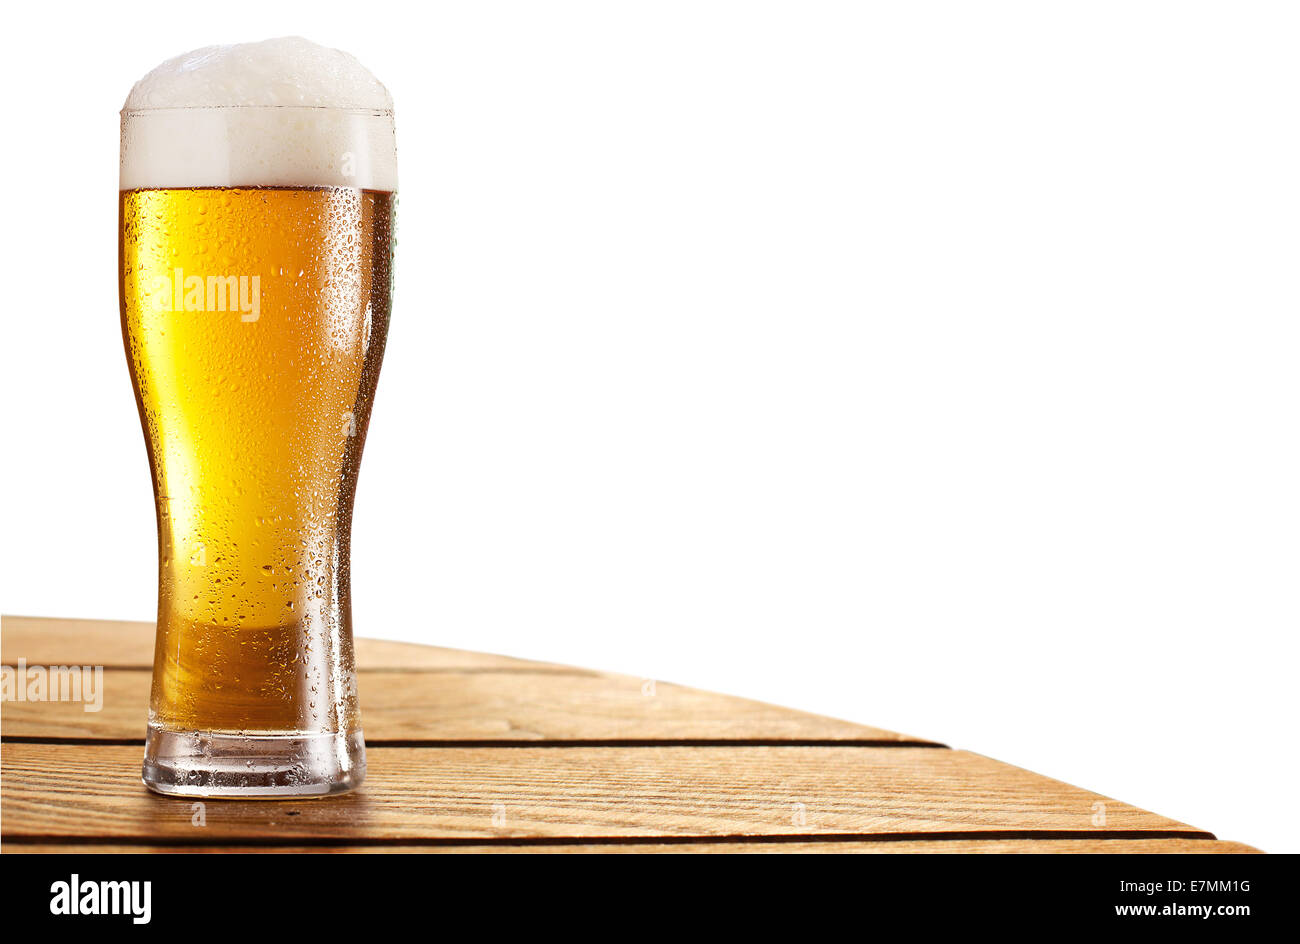 Beer glass on the bar table isolated on a white. Contains clipping paths. Stock Photo